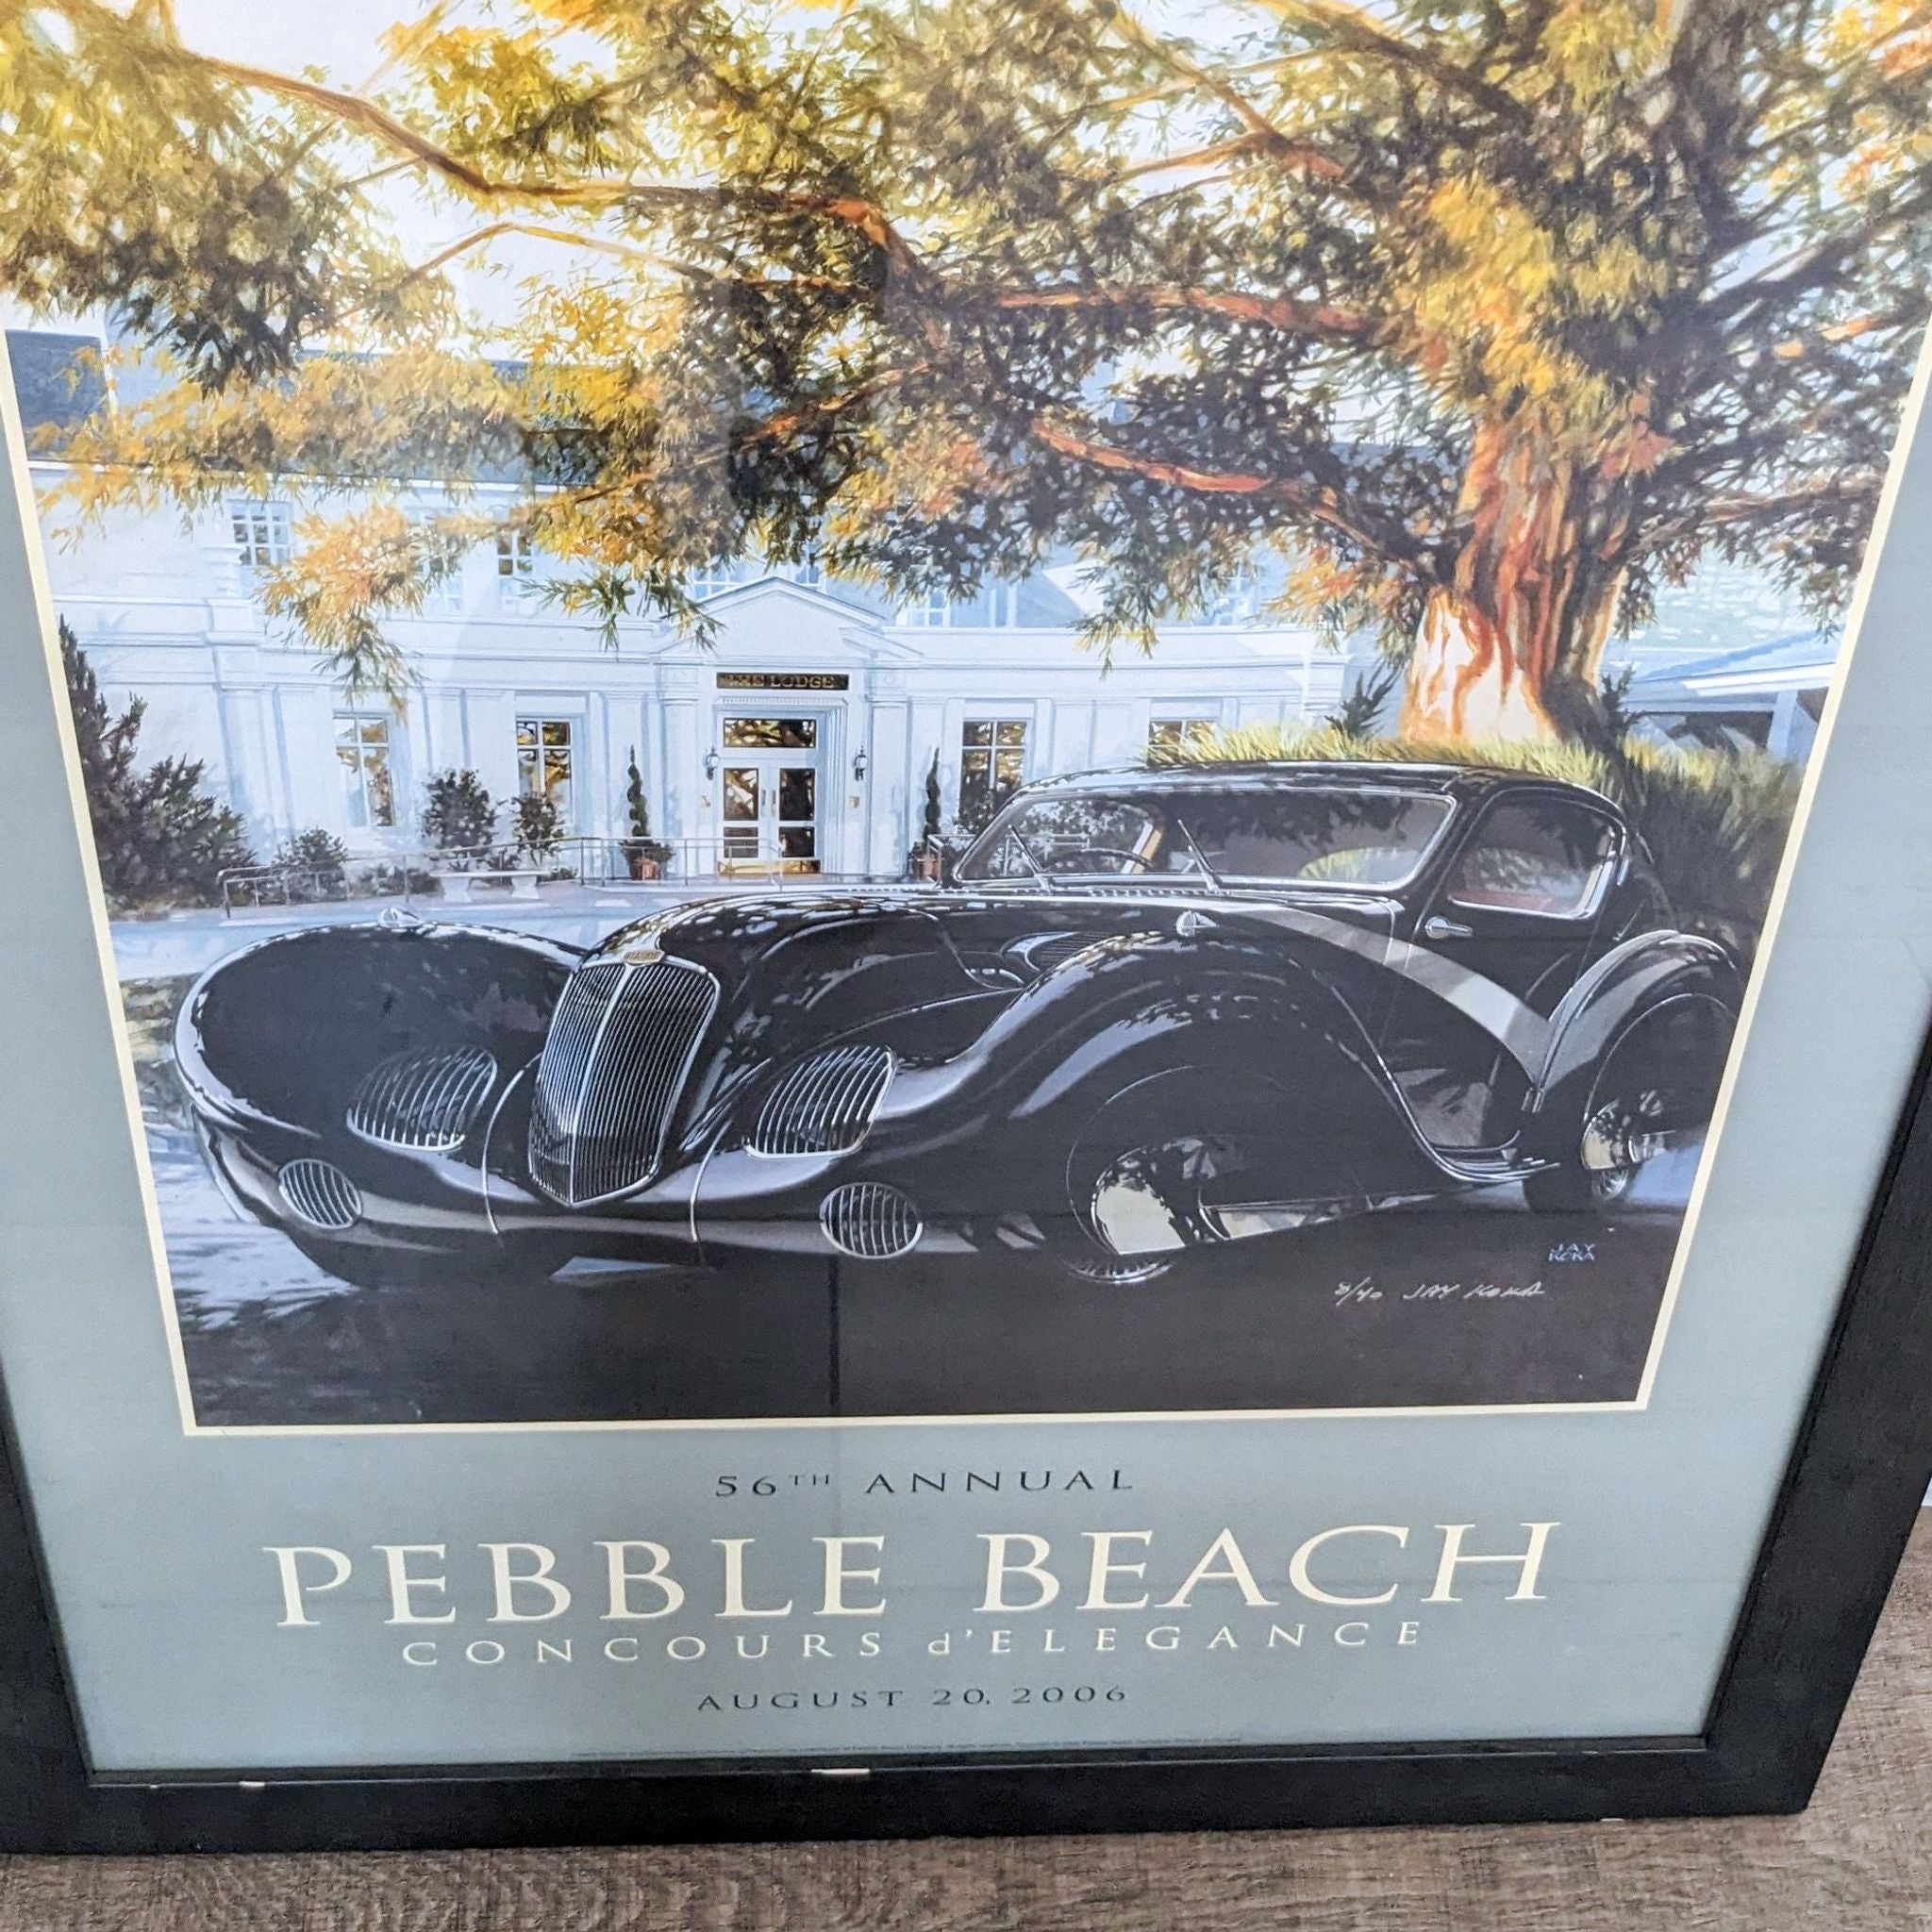 2. "Back of a framed 2006 Pebble Beach original poster depicting a Delahaye 135 Competition Sport Coupé, with hanging wire visible."